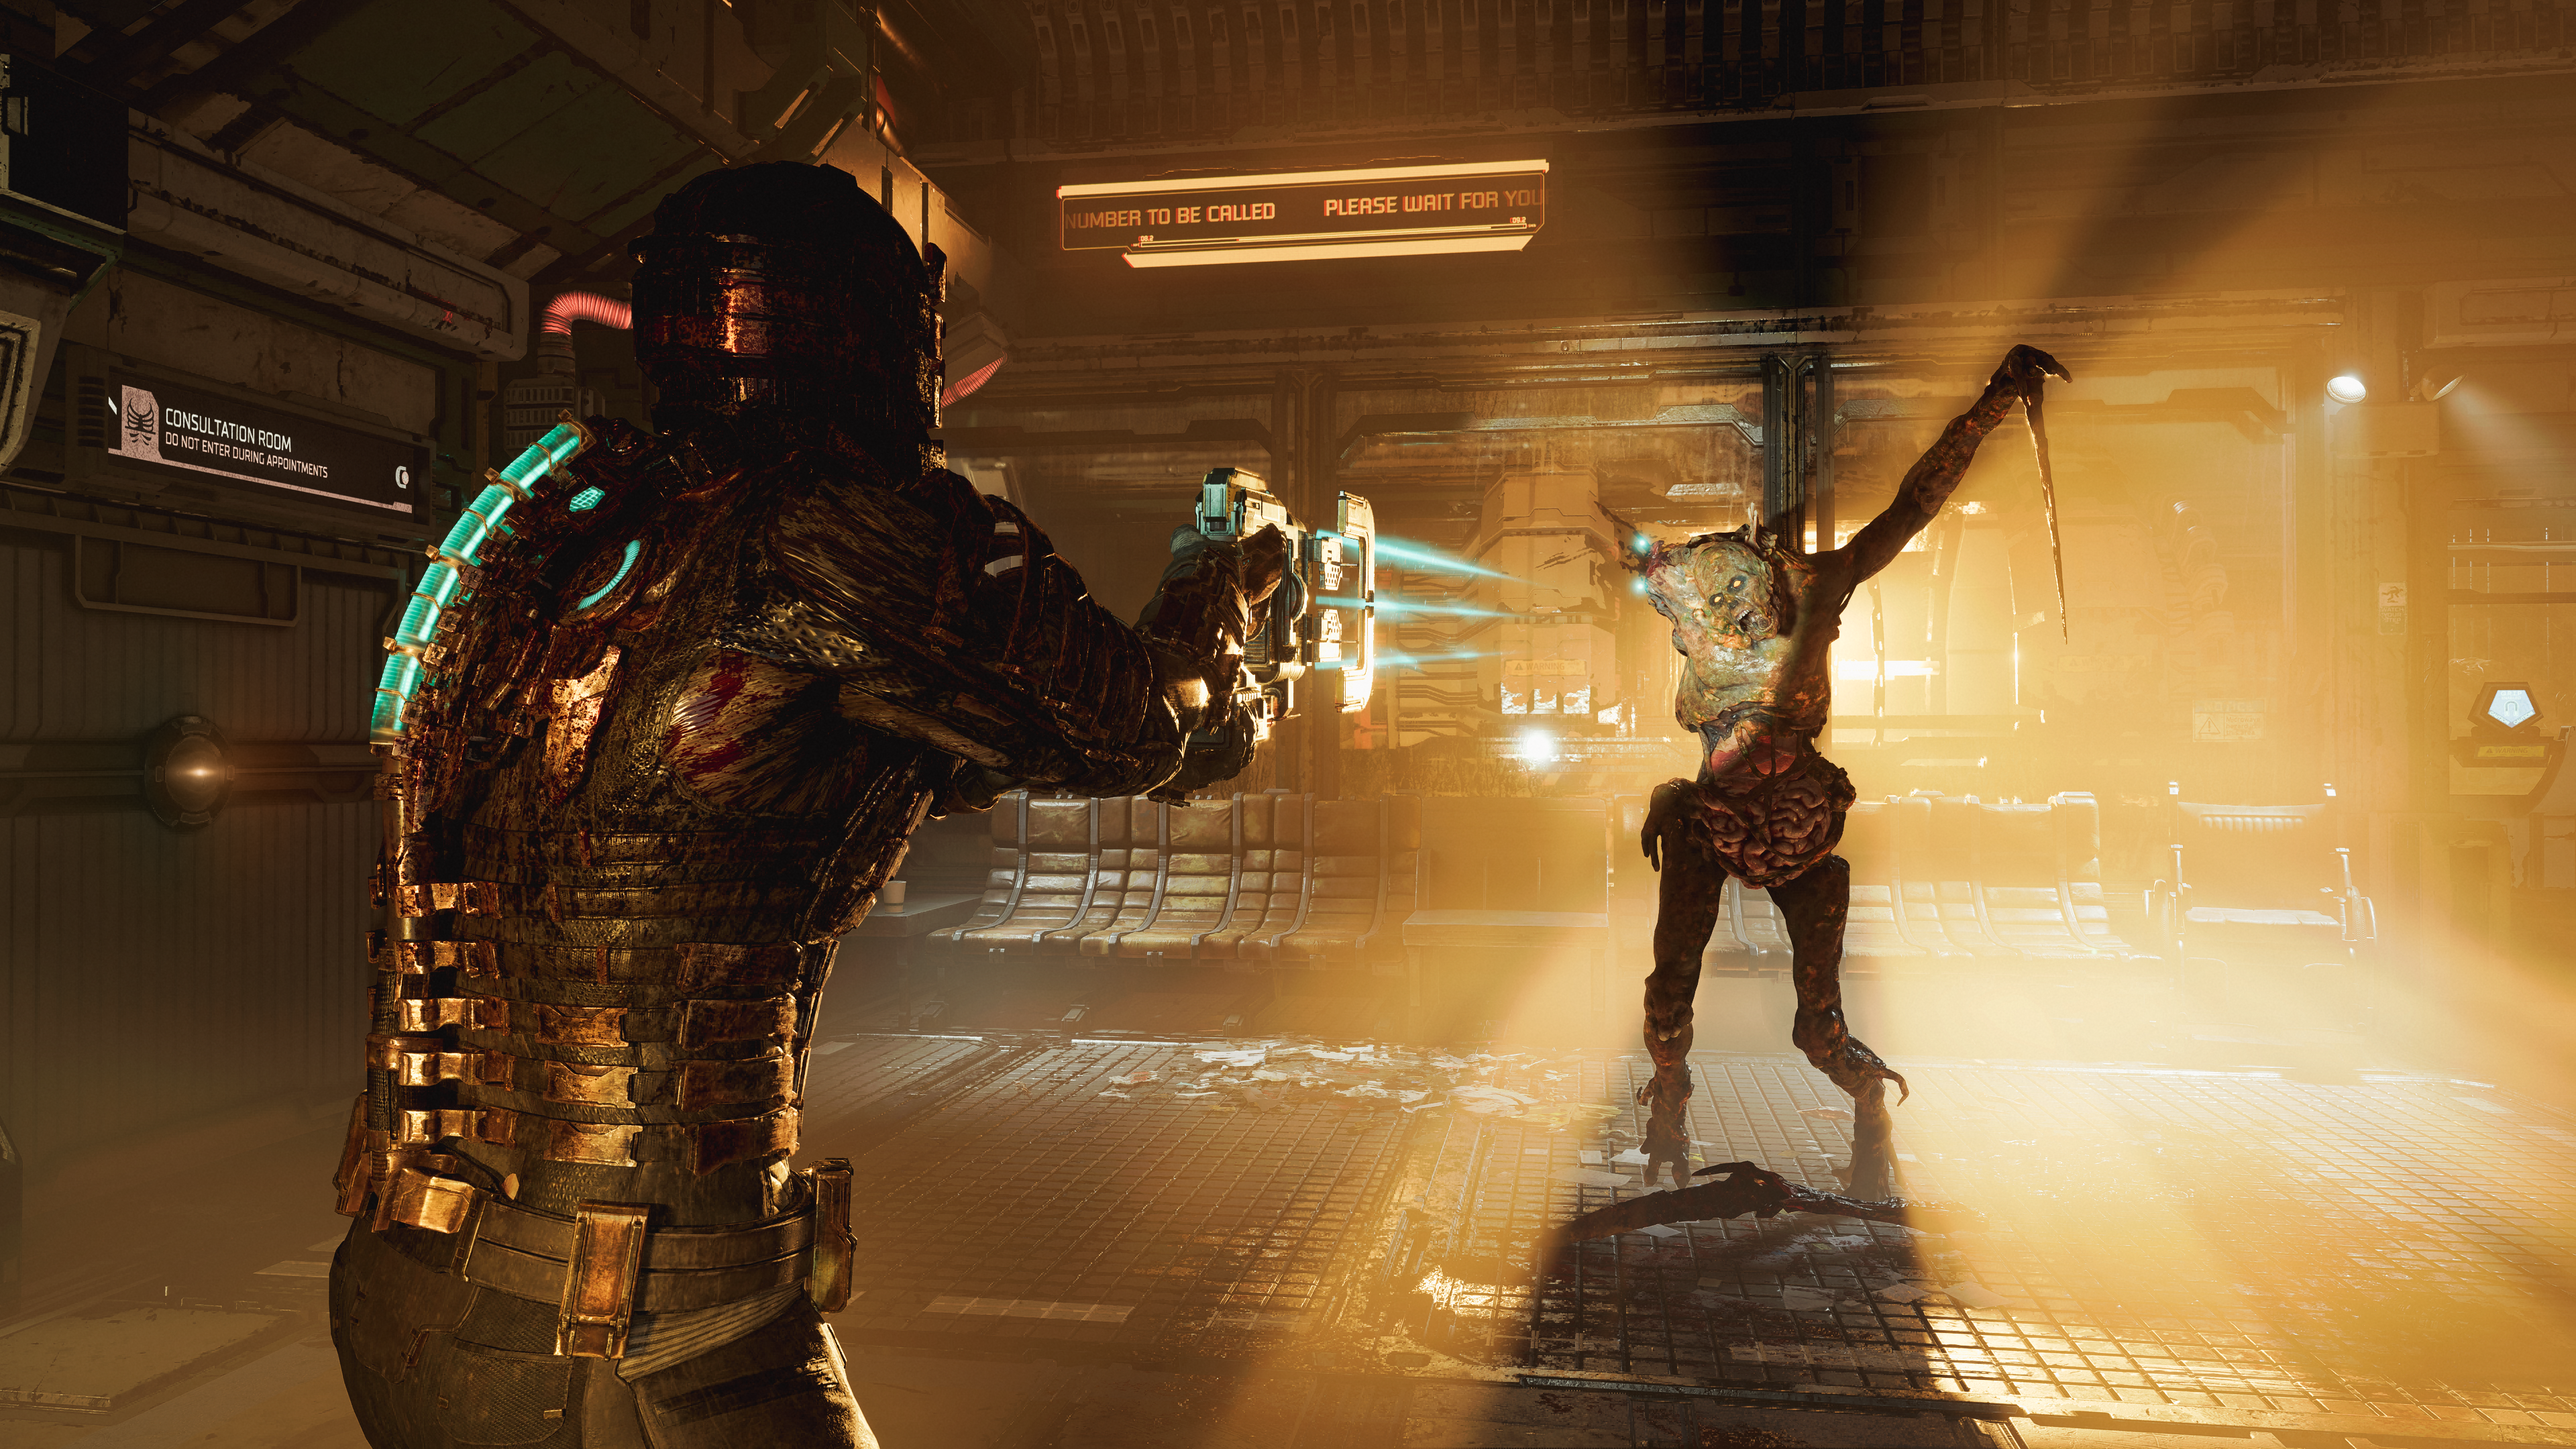 May's 'free'  Prime games include Dead Space 2 and Curse of